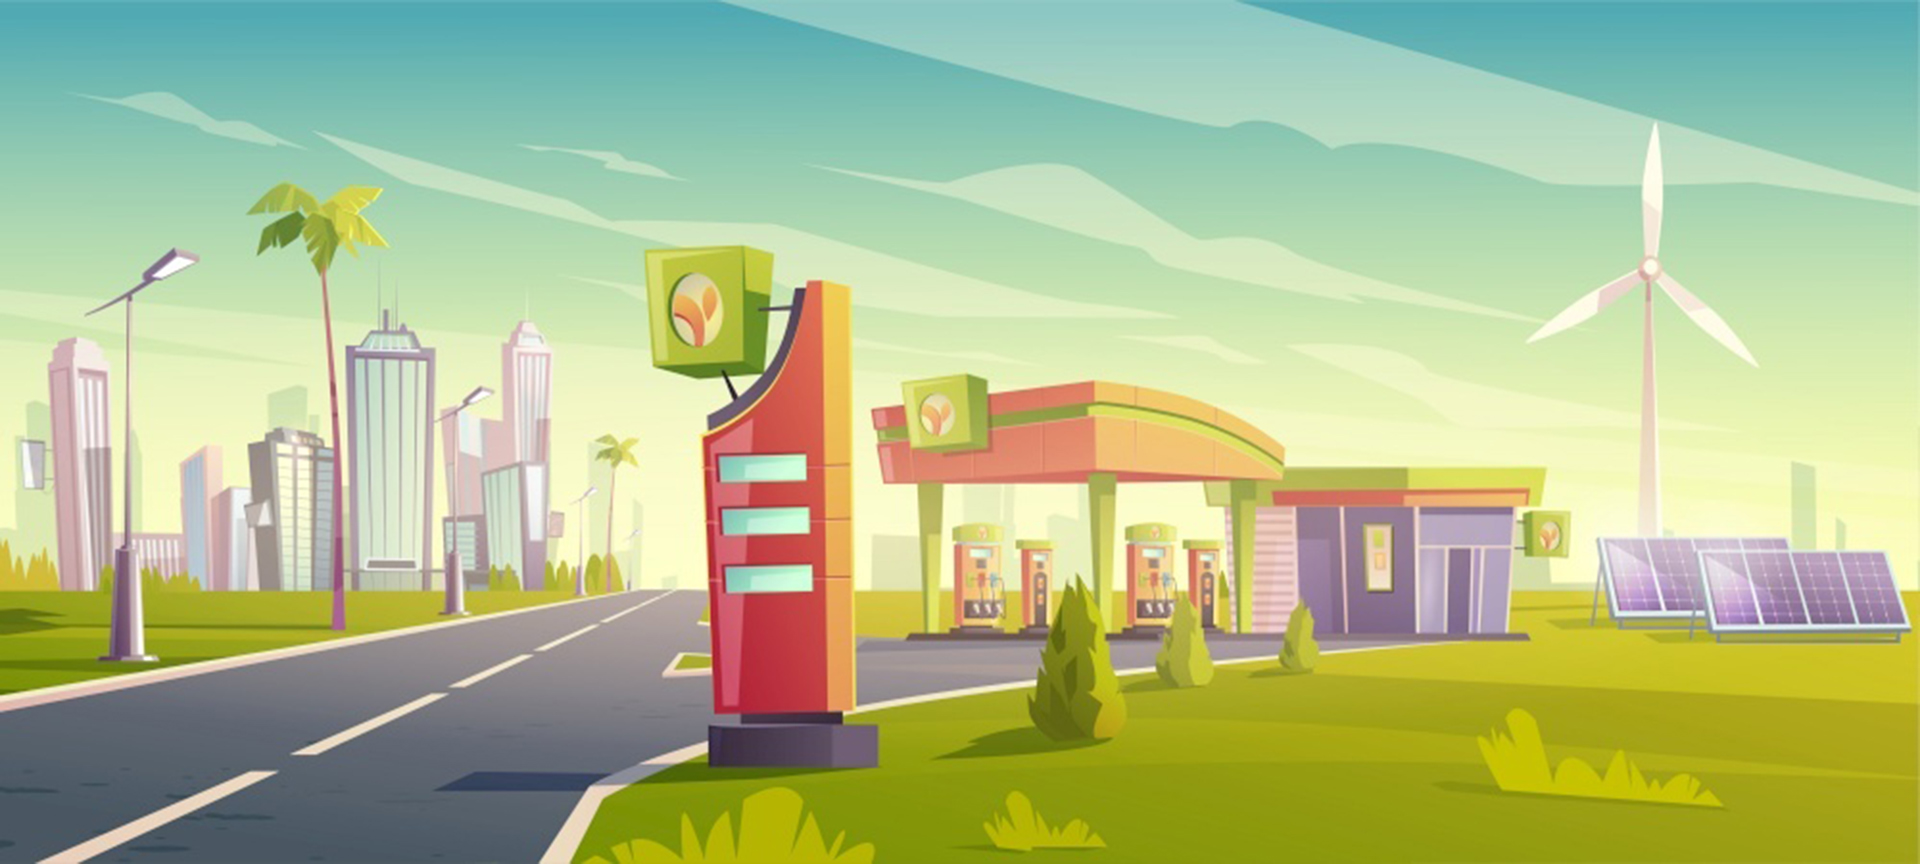 Eco gas station, green city car refueling service, nature friendly petrol shop with windmills, solar panels, building and price display, urban vehicle bio fuel selling. Cartoon vector illustration